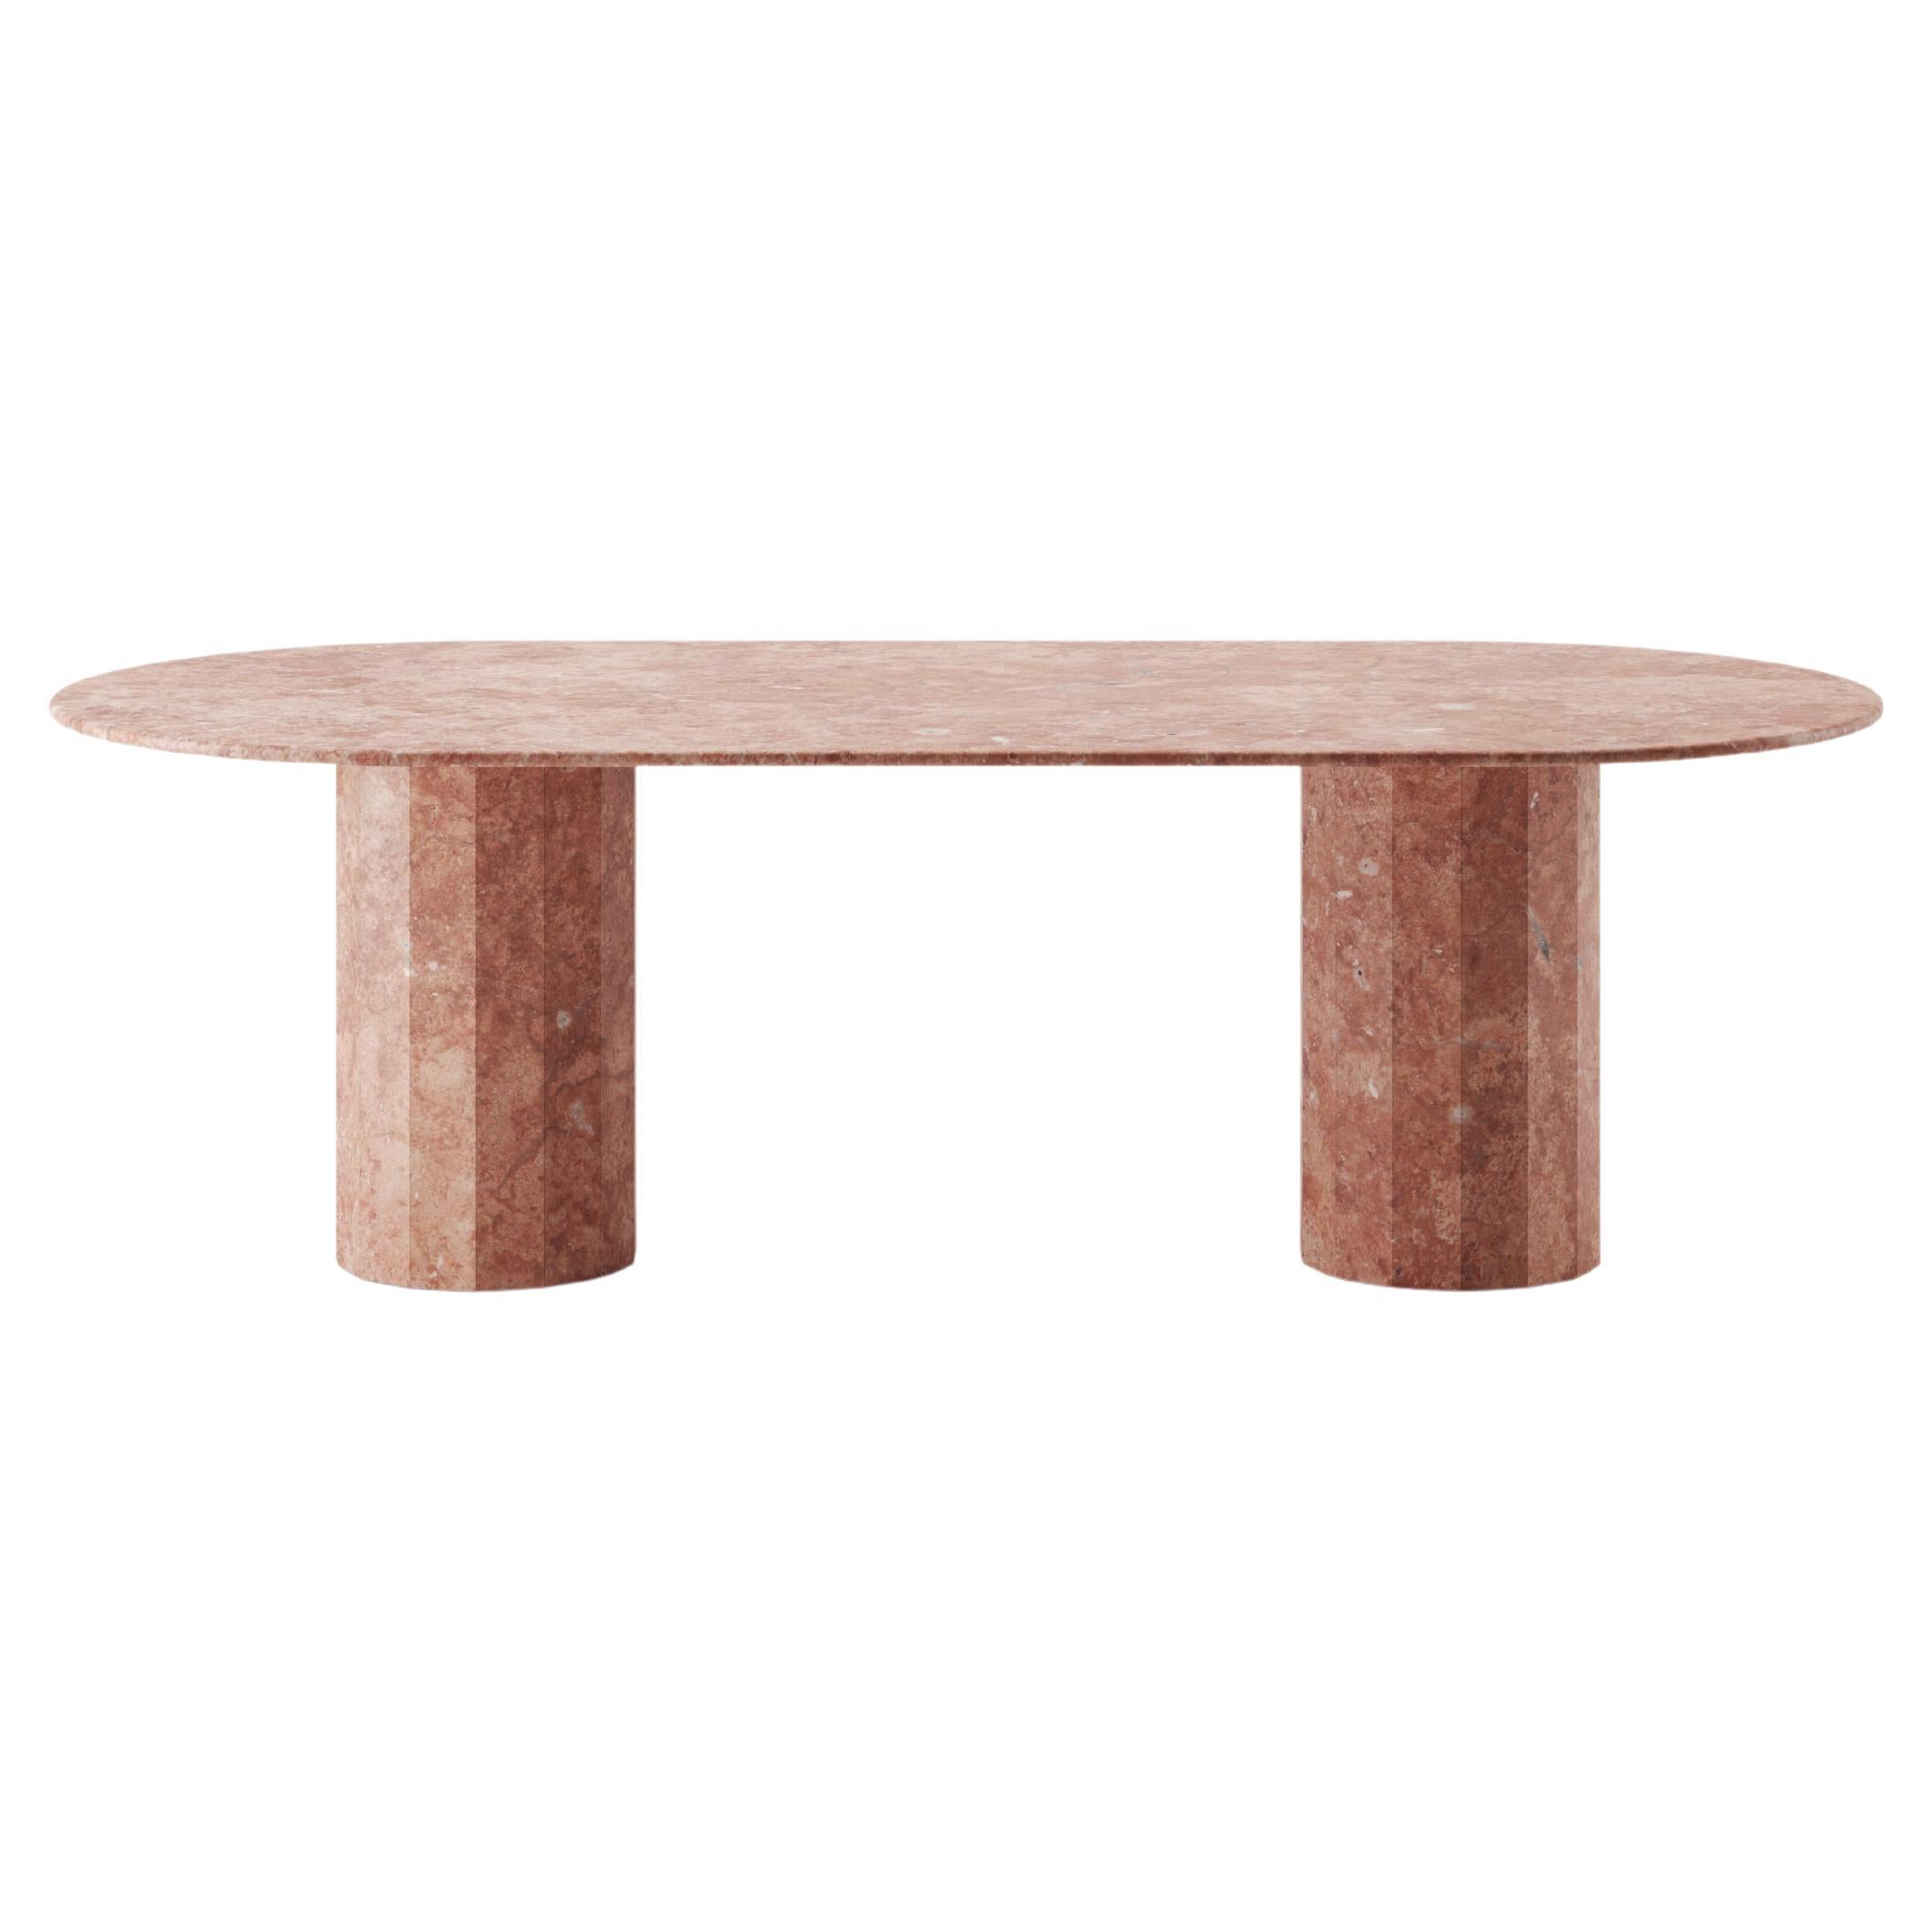 Palladian 240cm/94.4" Oval Dining Table in Red Travertine